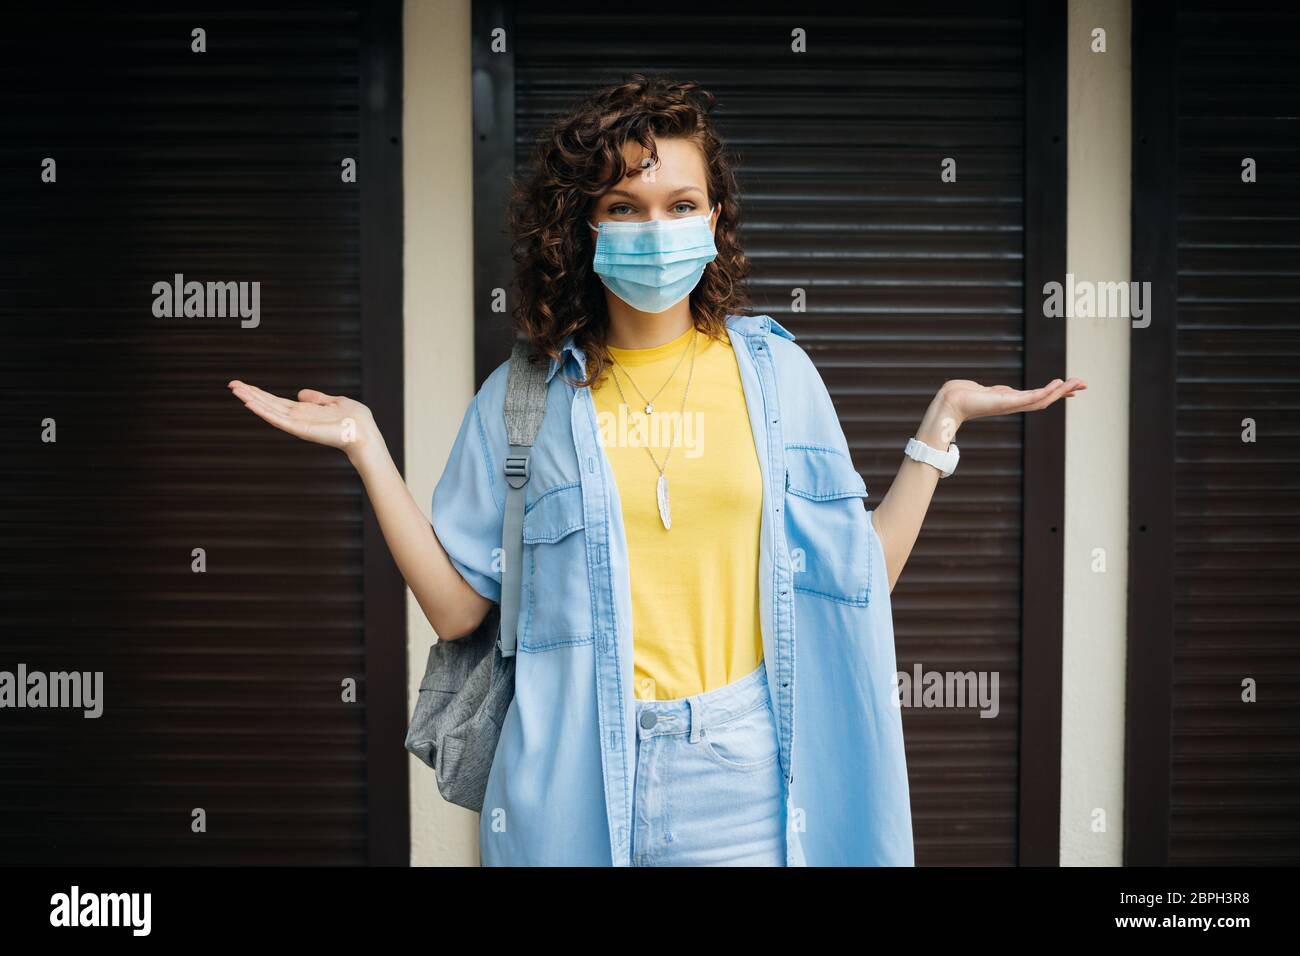 Closed stores during quarantine, young woman in protective medical mask stands on the threshold of non-working shop in confusion. Stock Photo